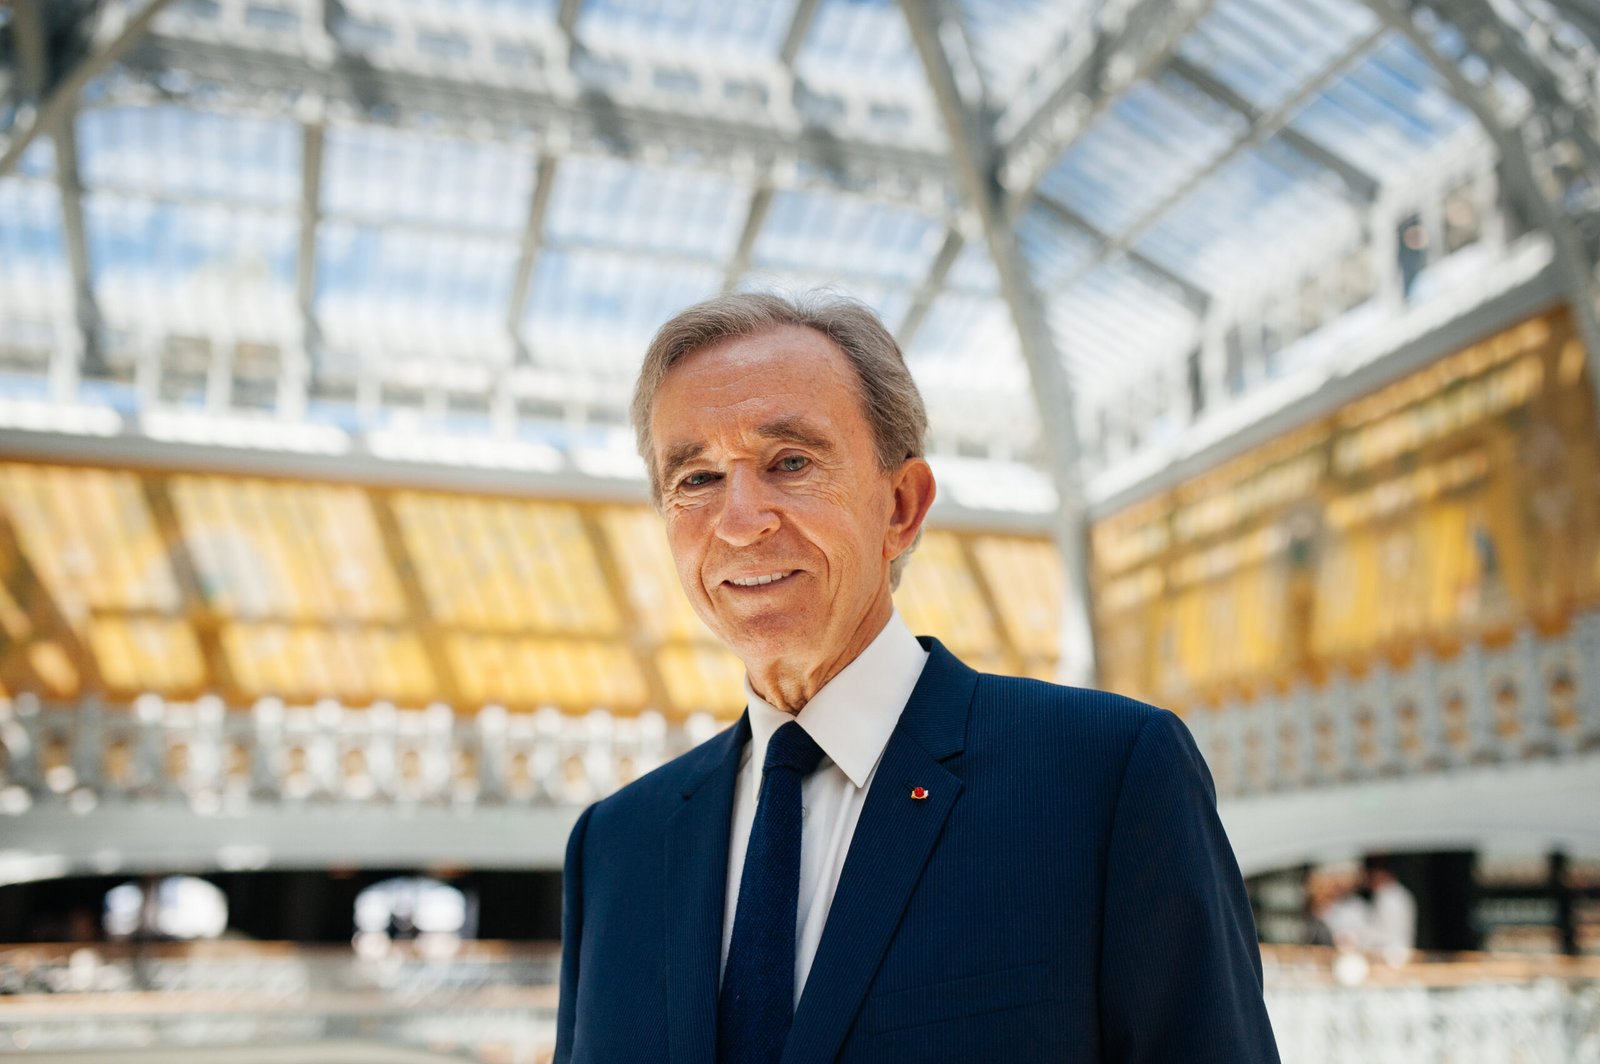 Richest Man, Bernard Arnault's Company LVMH, Achieves Record Valuation In  Europe - Discover Walks Blog